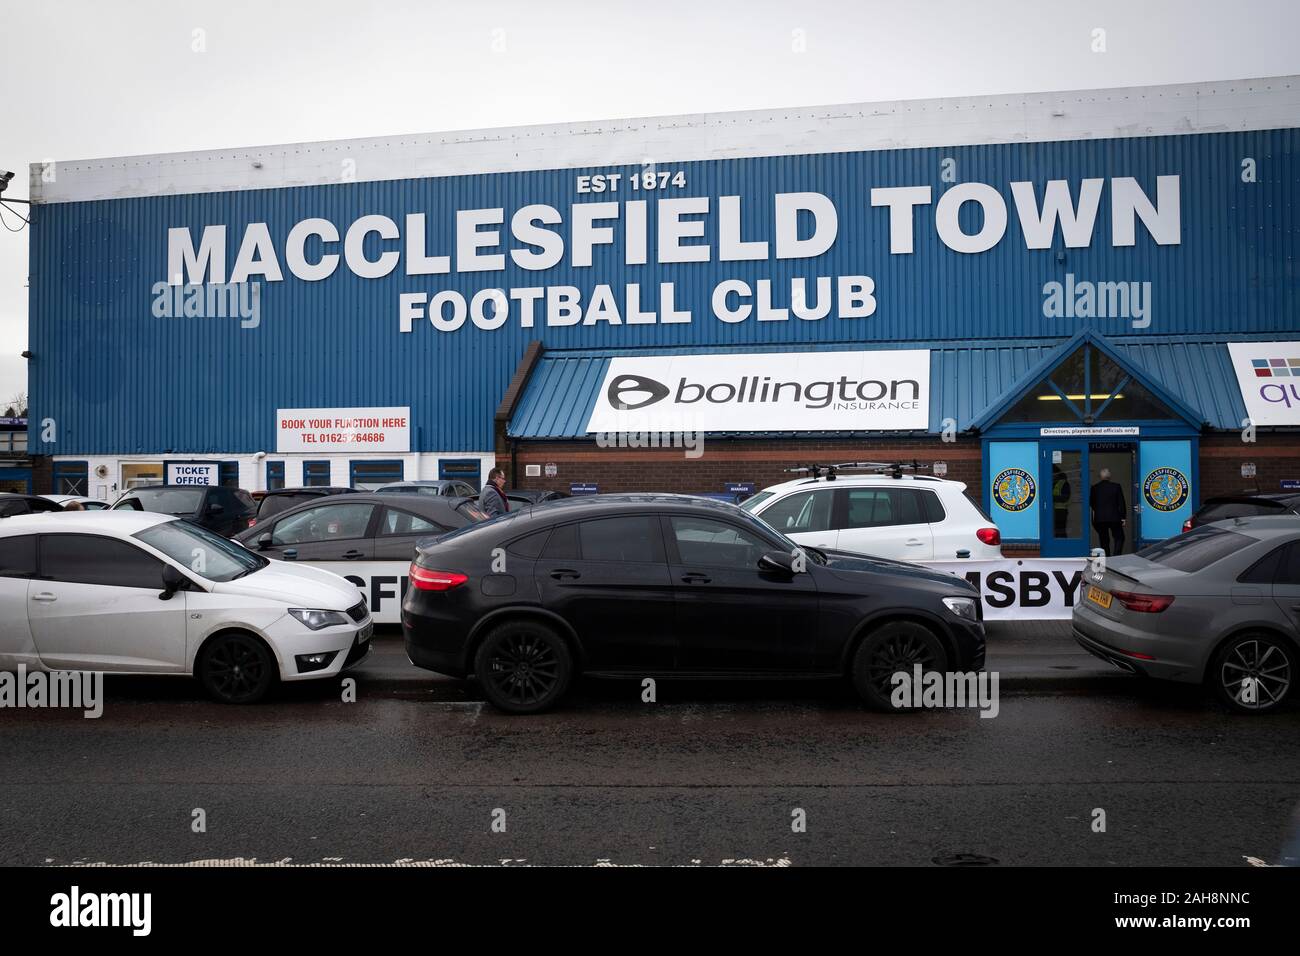 An exterior view of the ground before Macclesfield Town played Grimsby Town in a SkyBet League 2 fixture at Moss Rose. The home club had suffered problems in the run up to this fixture with the EFL deducting points after they failed to pay staff and they had a game postponed. This match ended in a 1-1 draw, watched by a crowd of 1,991. Stock Photo